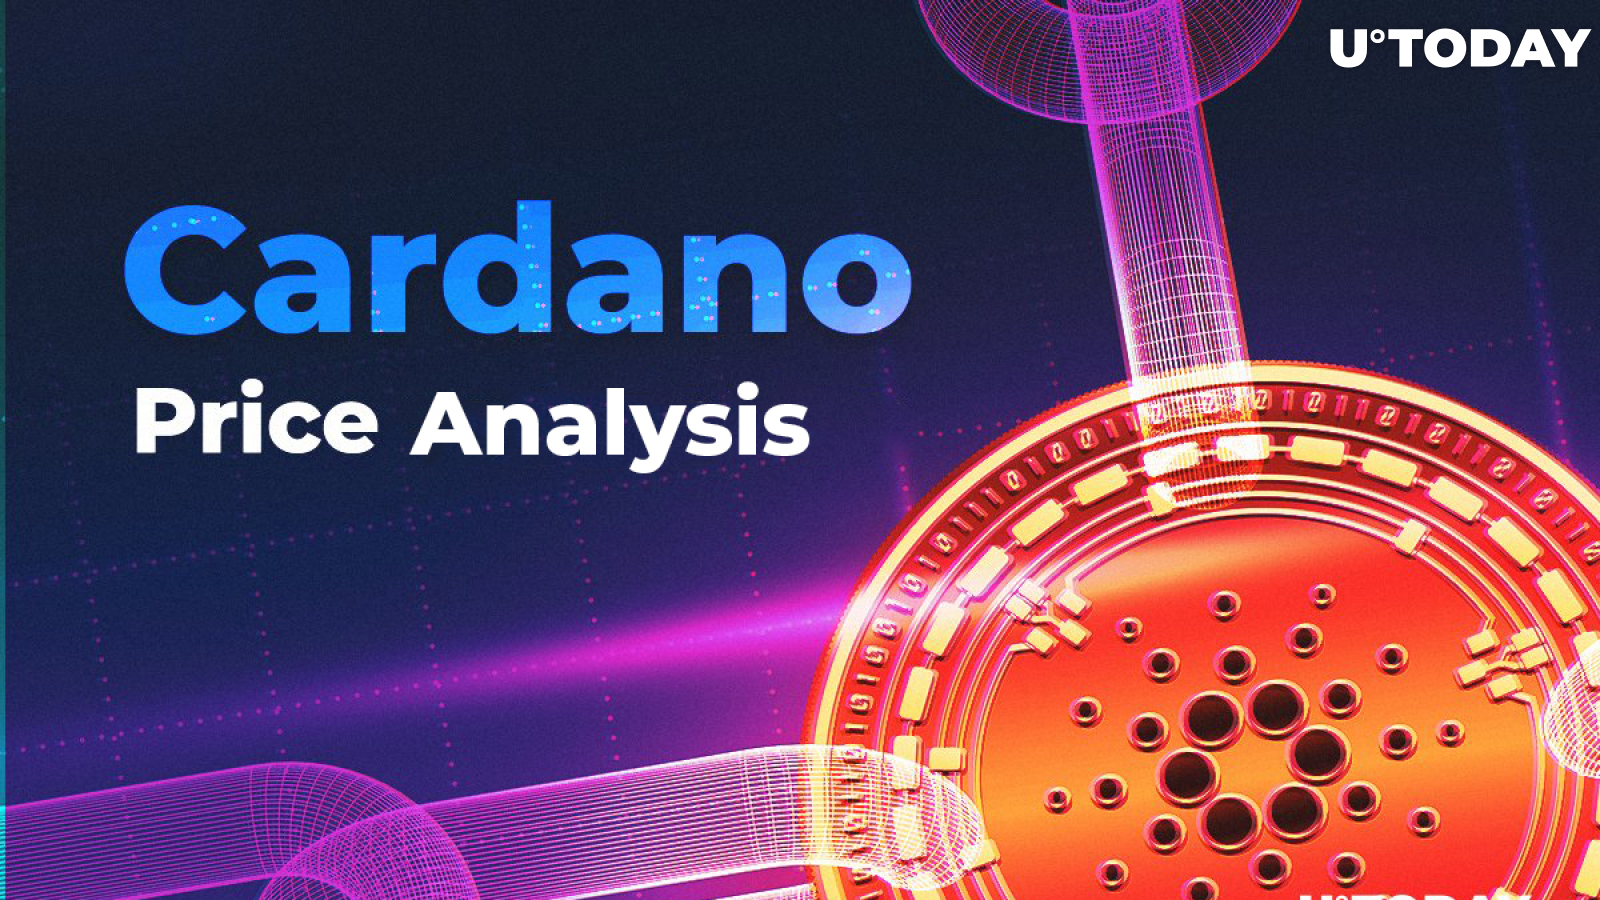 Cardano Price Analysis — How Much Might the Cost of ADA Be in 2019-20-25?